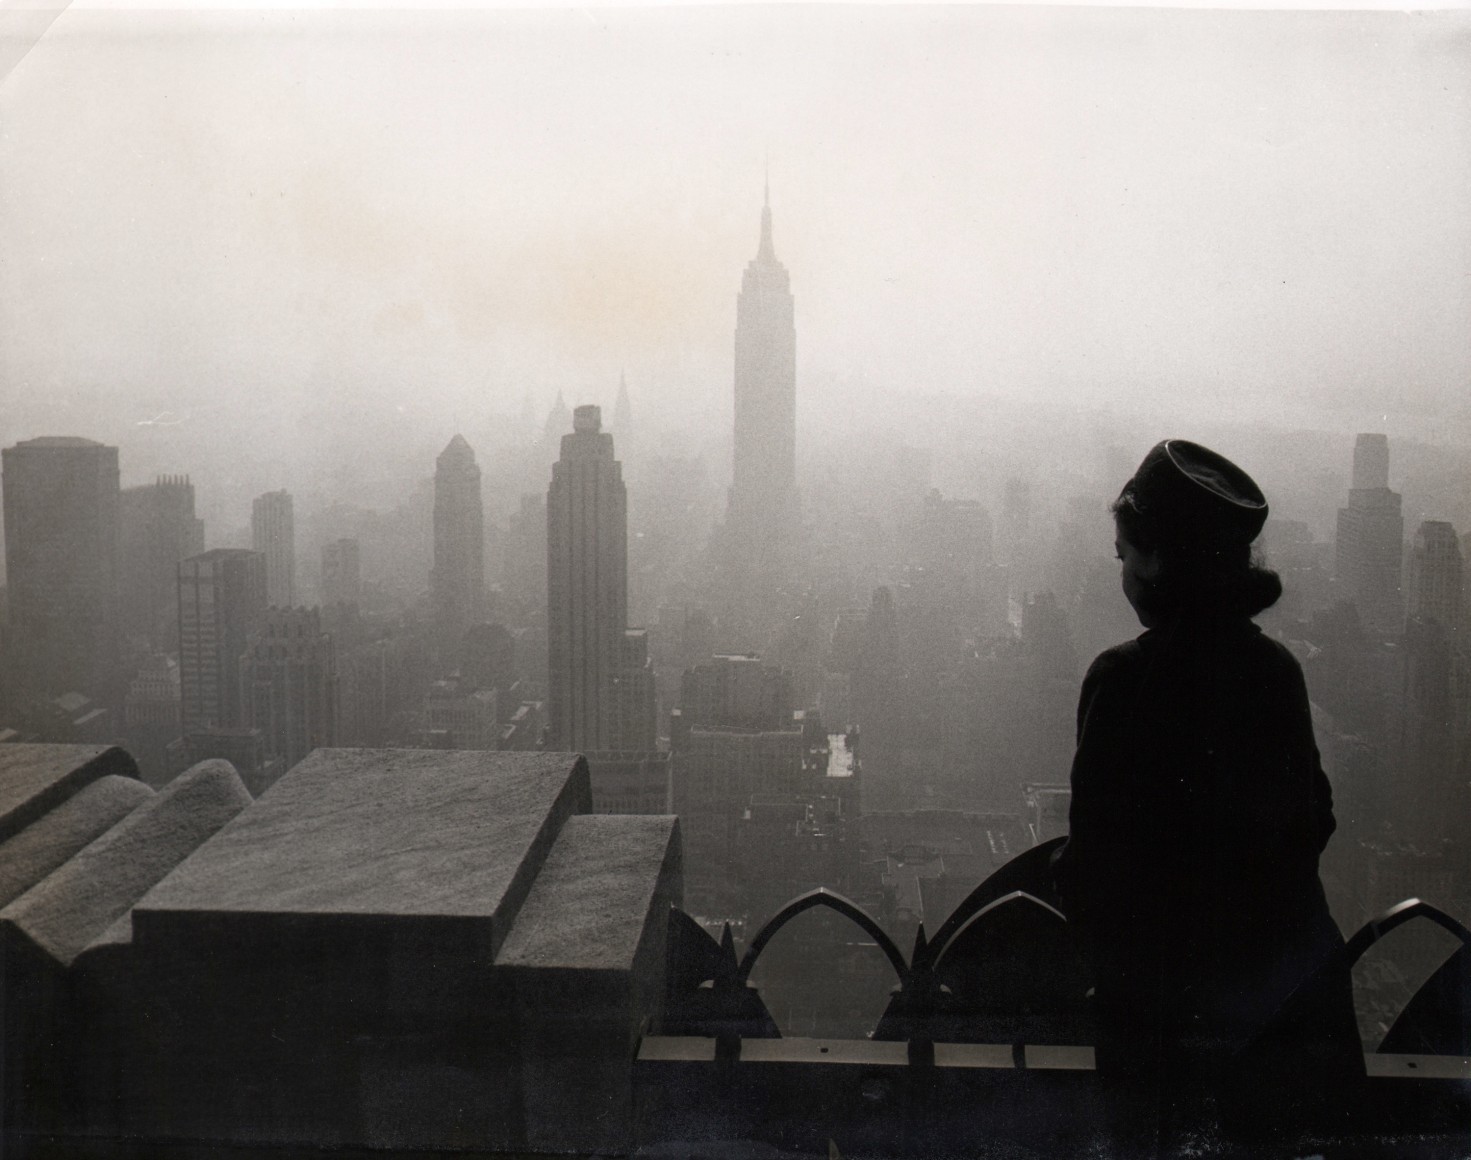 17. UPI Photo, Smog-Bound City, ​1965. A silhouetted woman stands on a balcony, looking out towards a foggy skyline that includes the Empire State Building at the center.